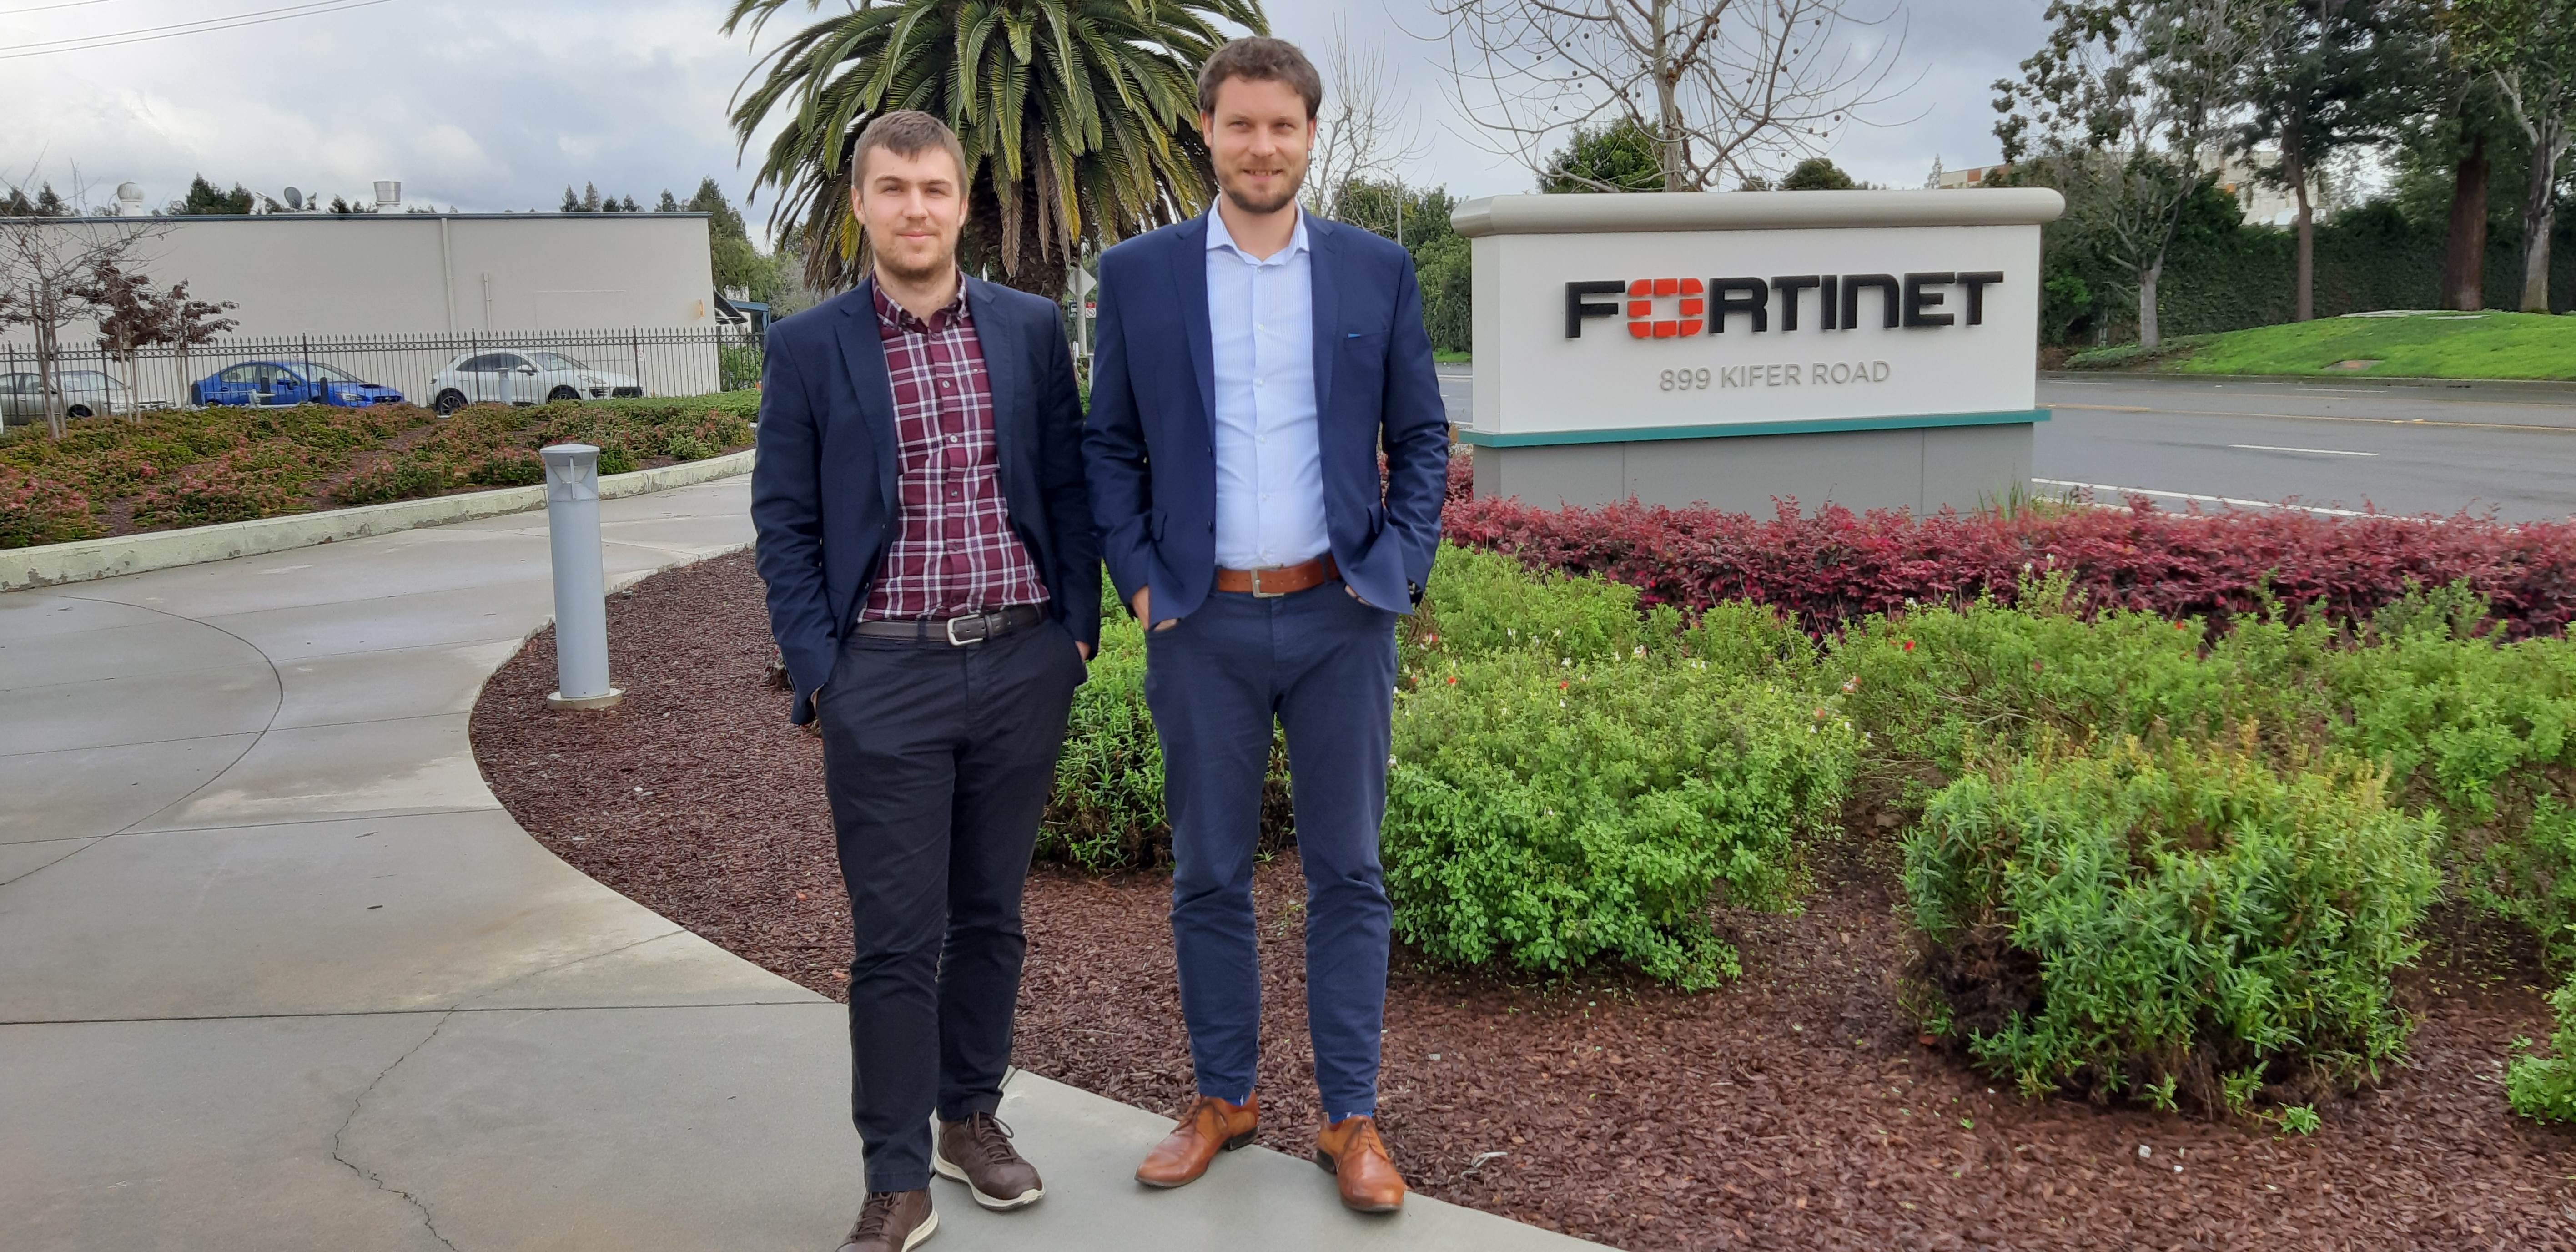 Safetica team in front of Fortinet headquarter